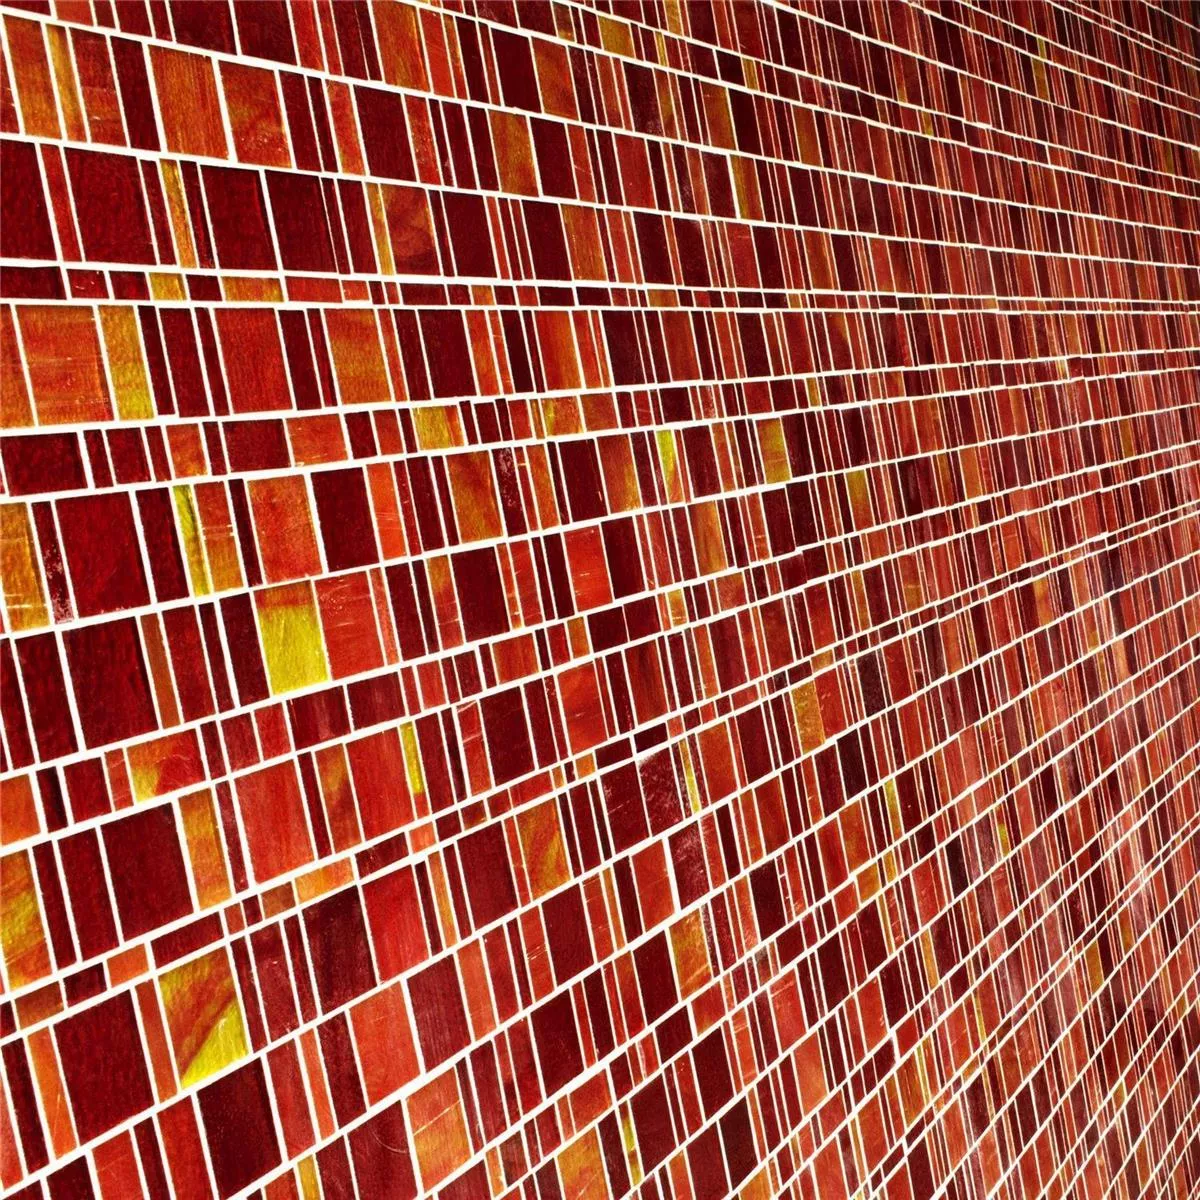 Glass Tiles Trend-Vi Mosaic Liberty Red